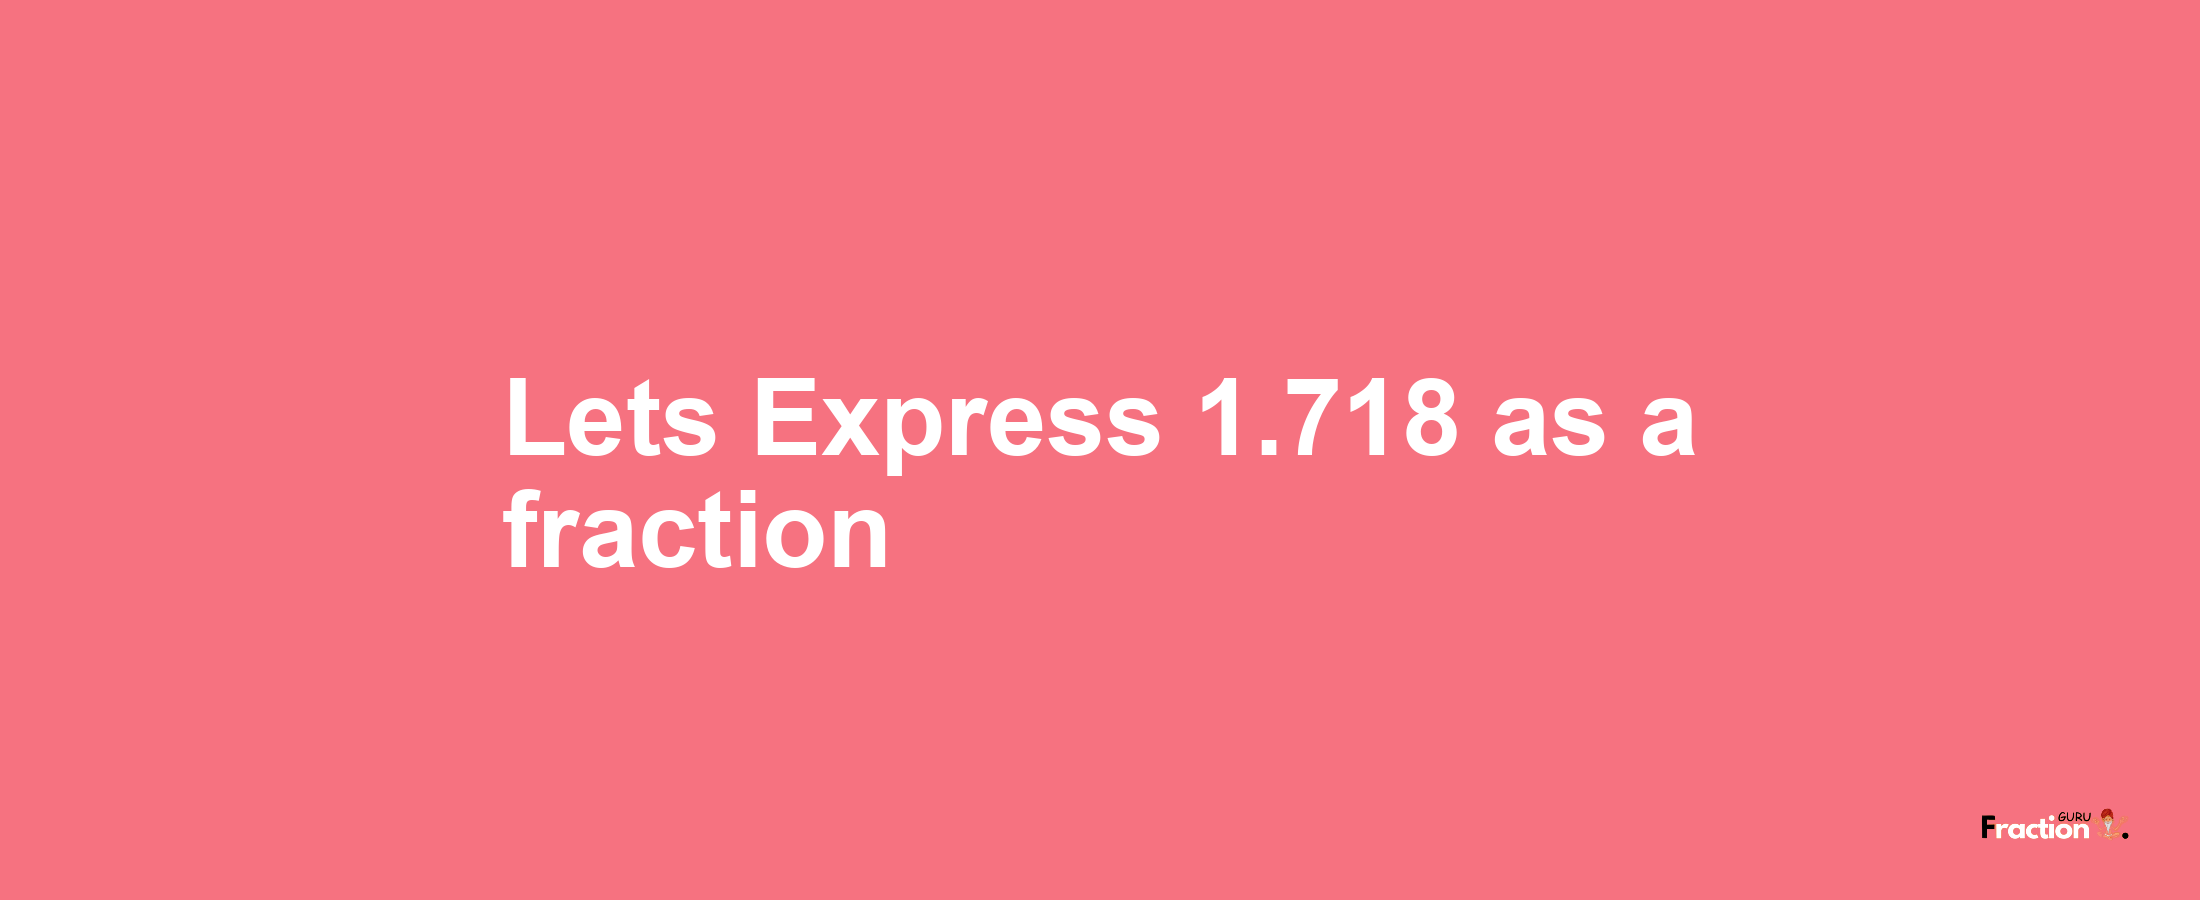 Lets Express 1.718 as afraction